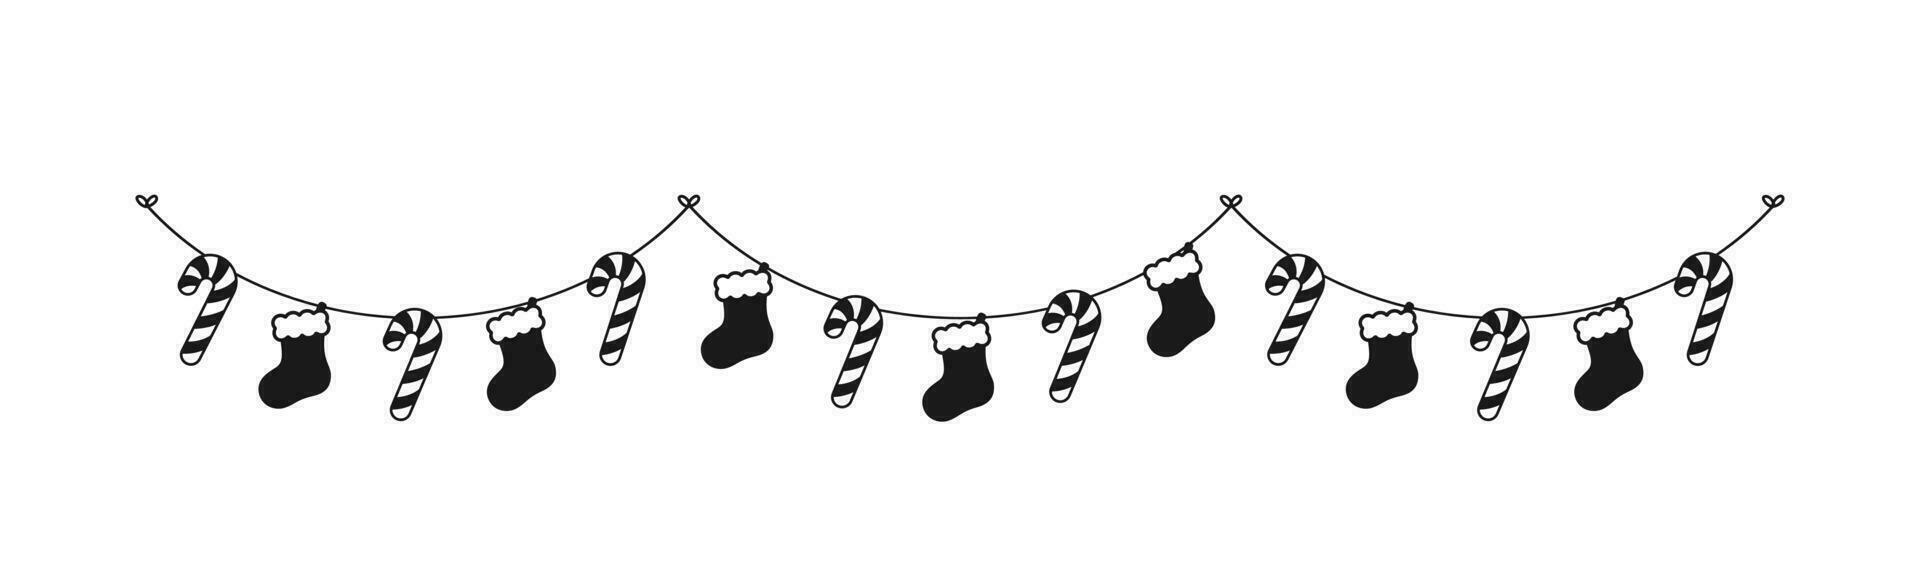 Christmas Stocking and Candy Cane Garland Silhouette Vector Illustration, Christmas Graphics Festive Winter Holiday Season Bunting